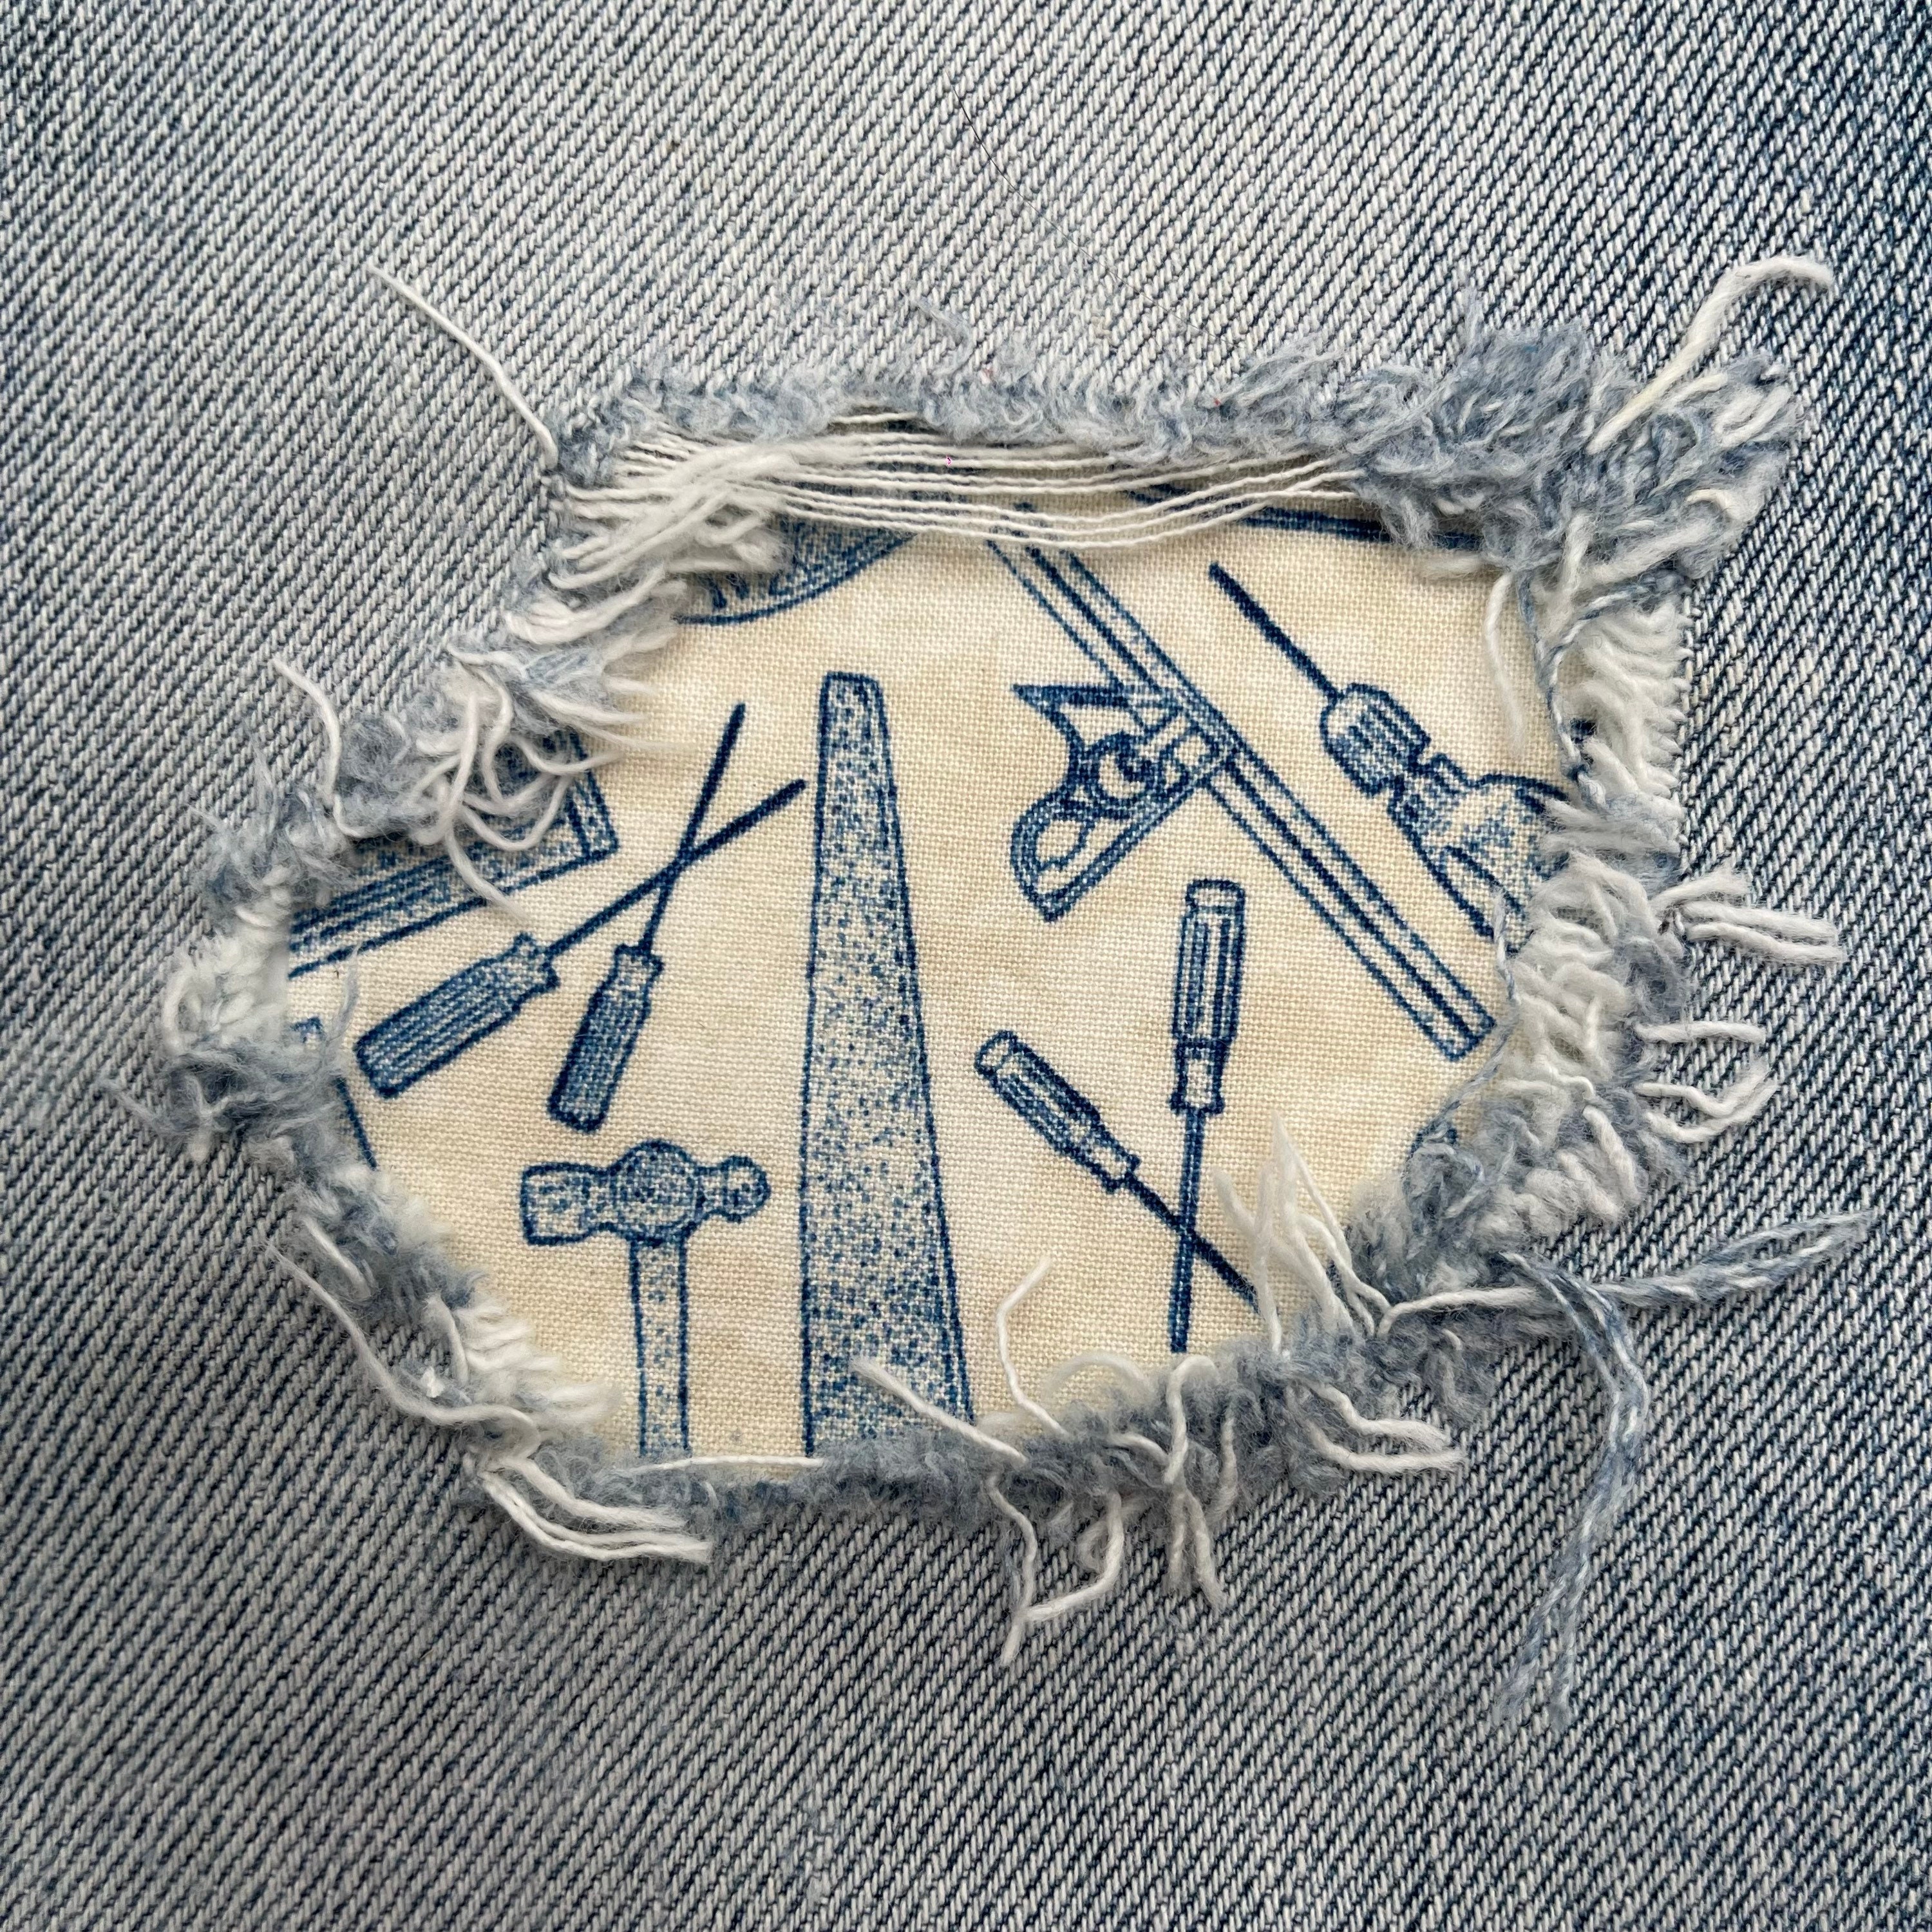 Ripped Designs Denim Patches Tools and Wood Grain Peekaboo Iron on Jeans  Patch Jeans Repair No Sew 